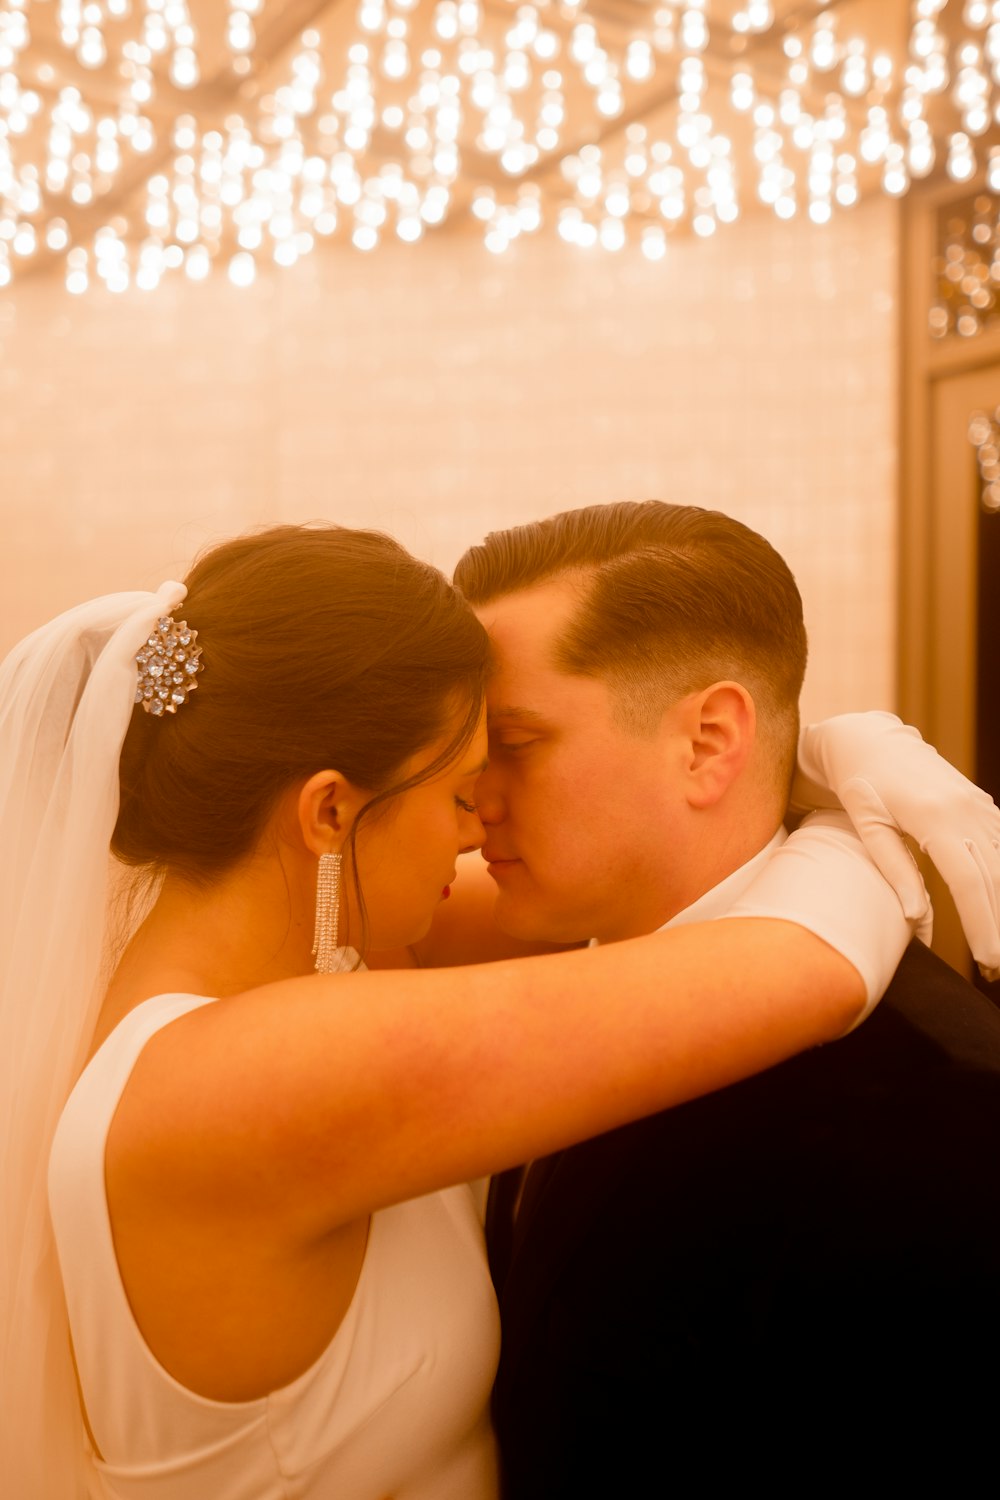 a bride and groom embracing each other in front of a mirror